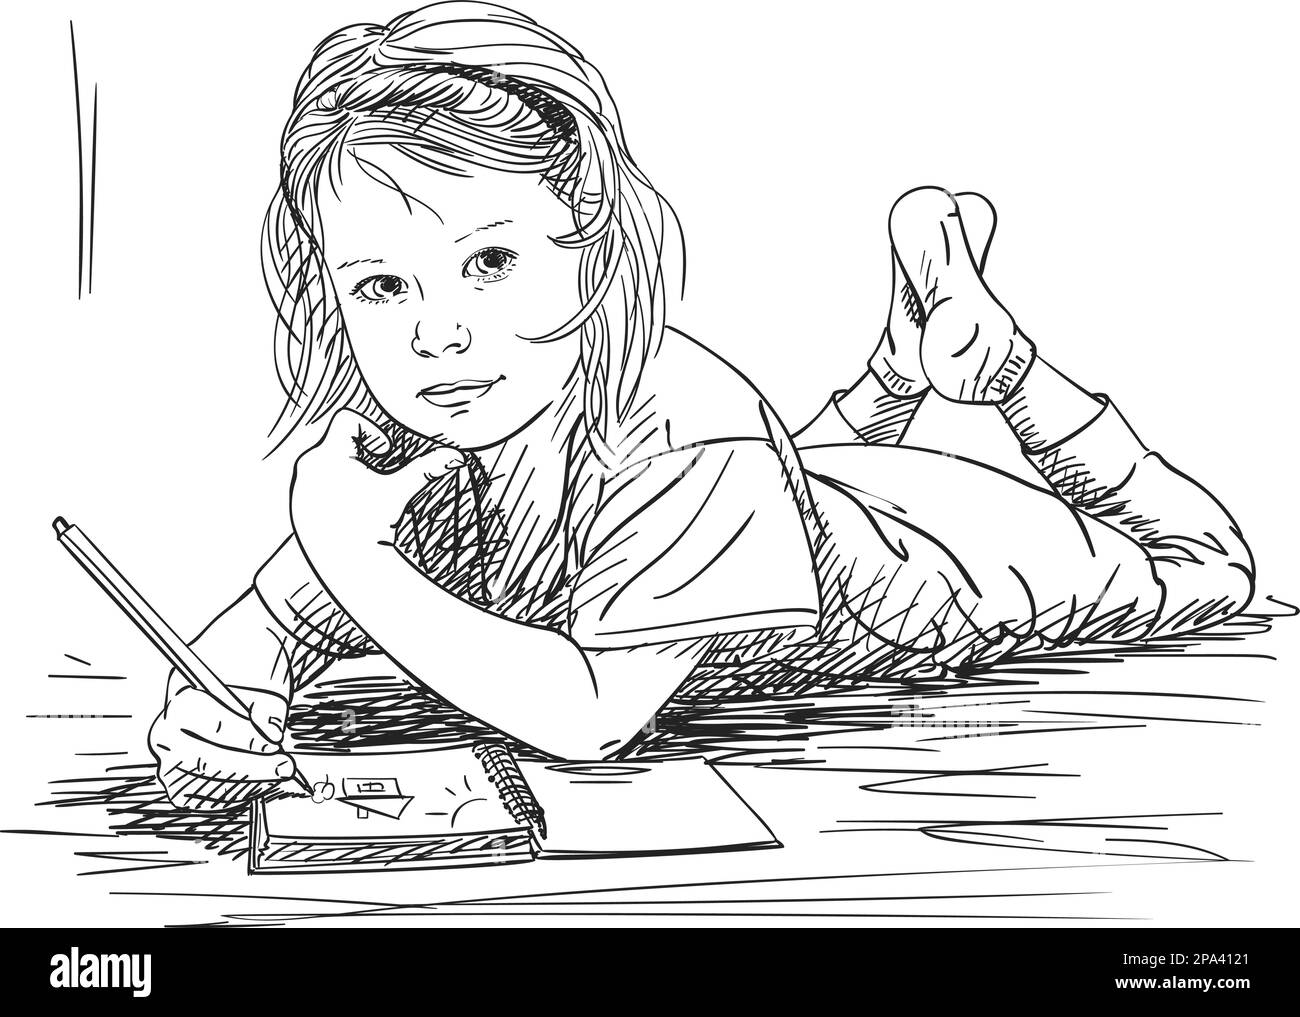 girl thinking clipart black and white